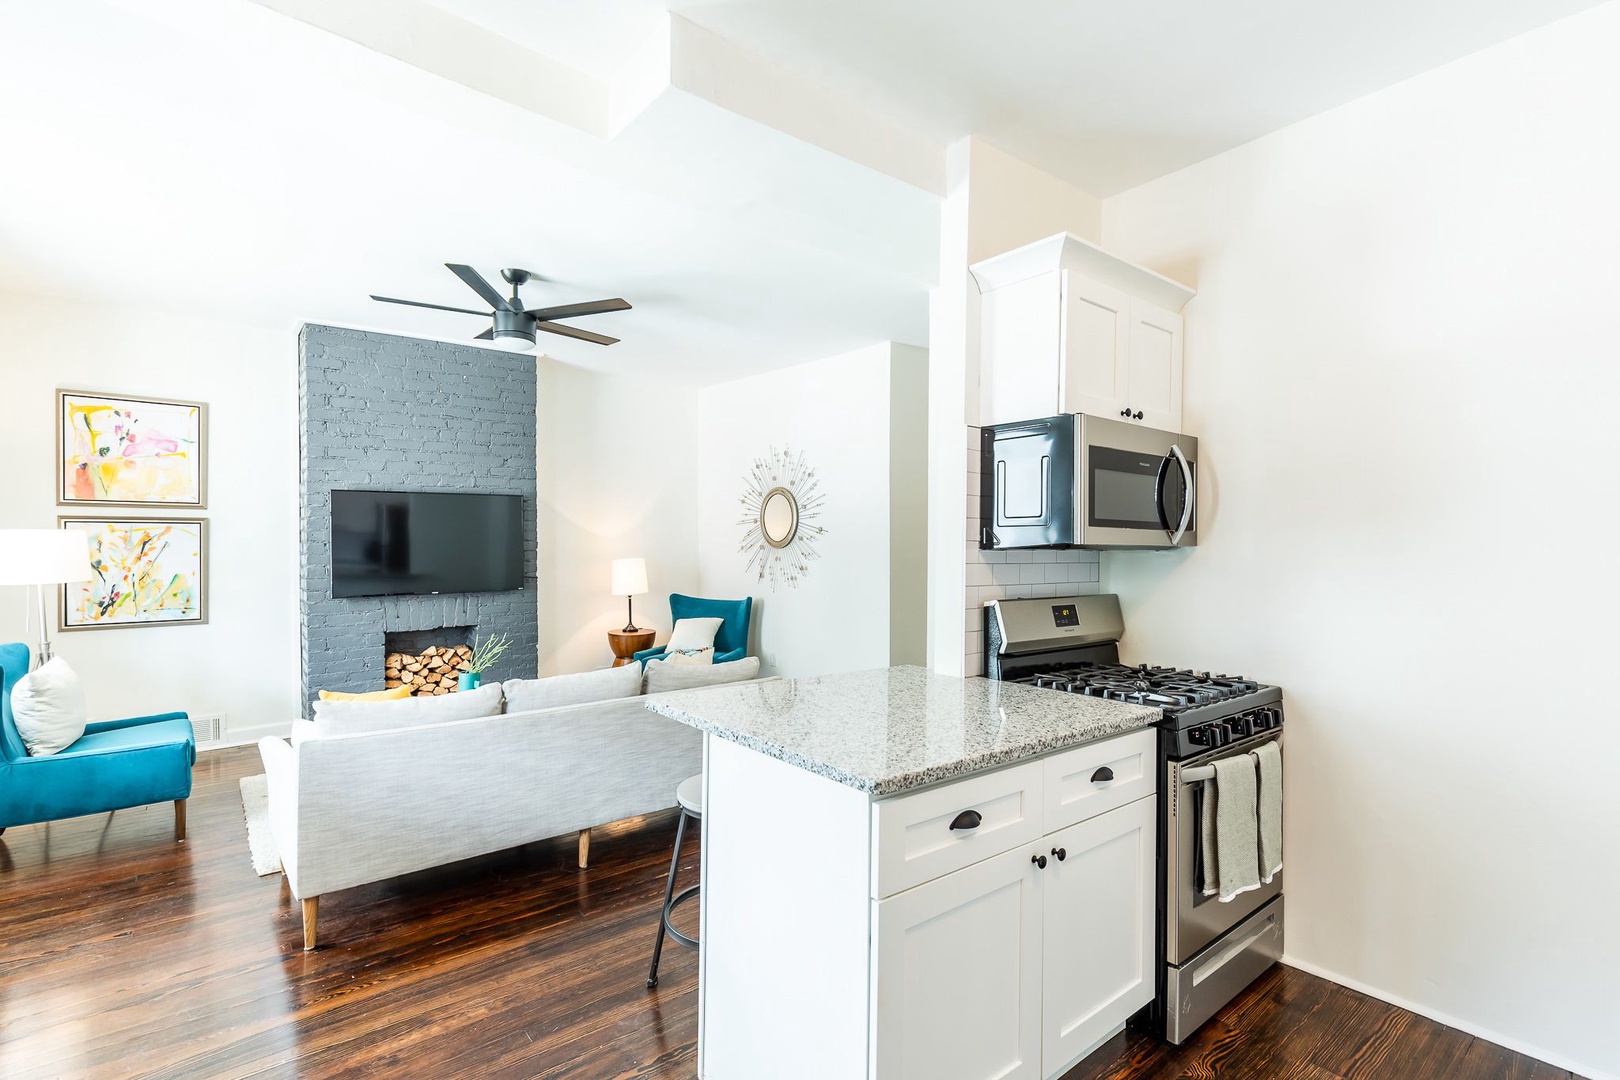 Apt 1 – The kitchen is spacious & well-equipped for your visit